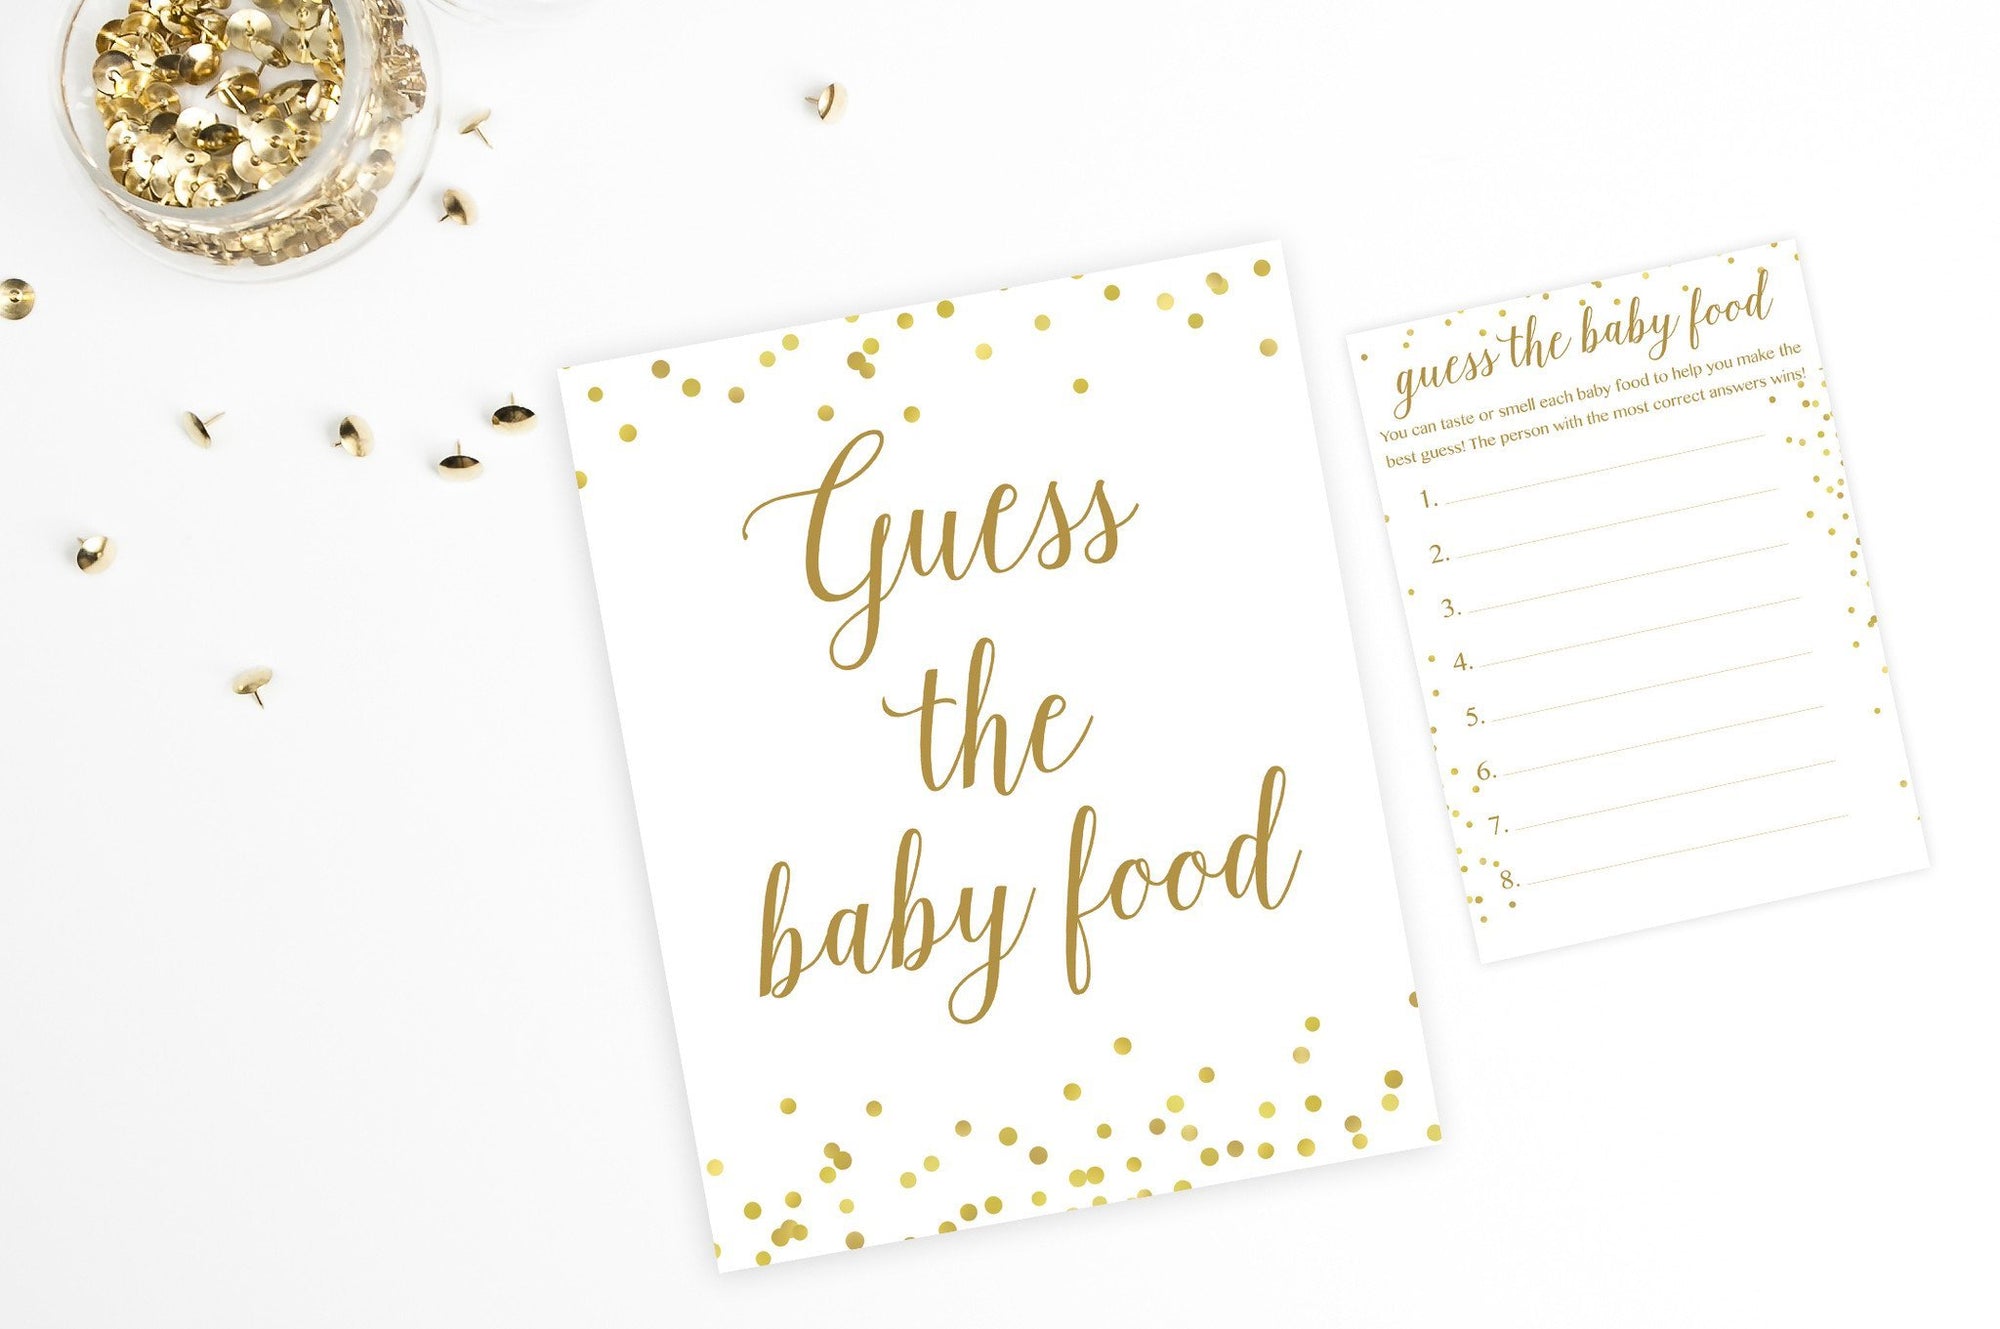 Guess The Baby Food - Gold Confetti Printable - Pretty Collected